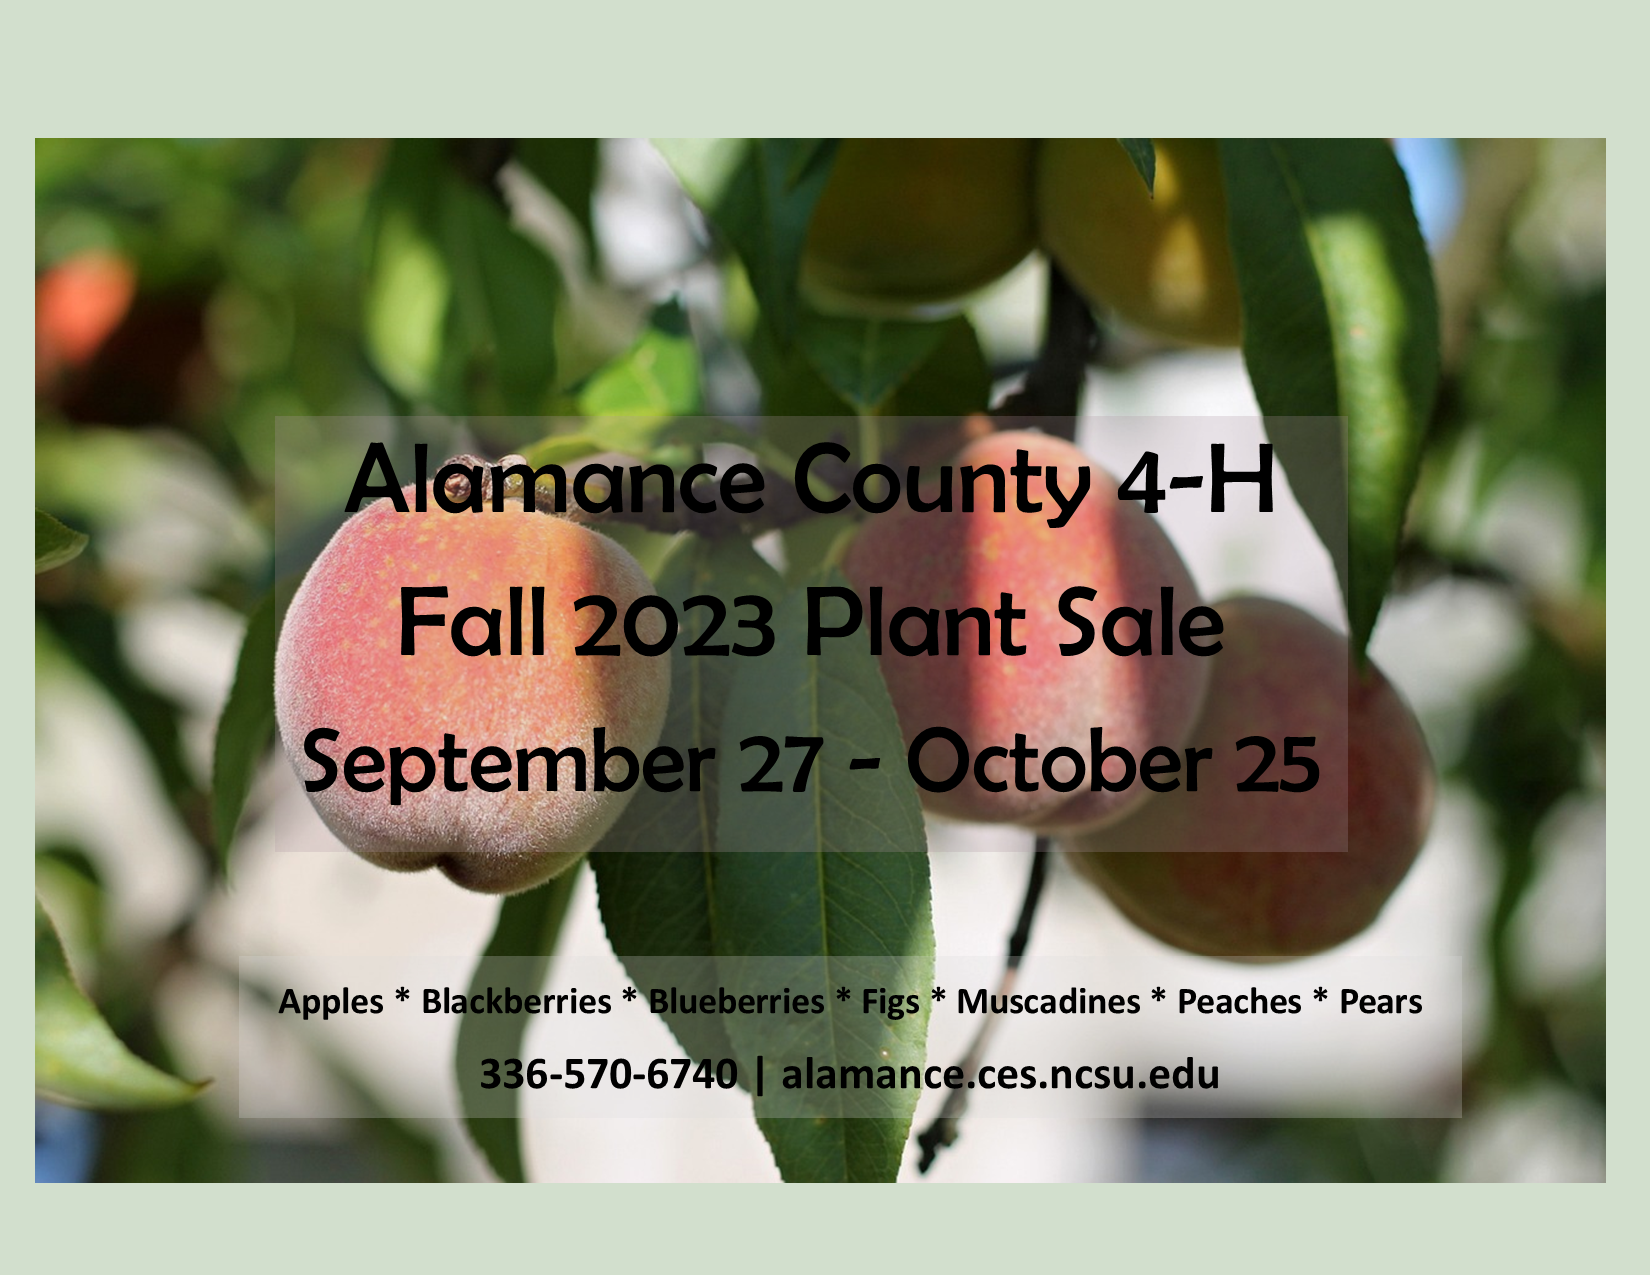 Flyer with Peaches on tree, dates of sale, plants being sold, contact info